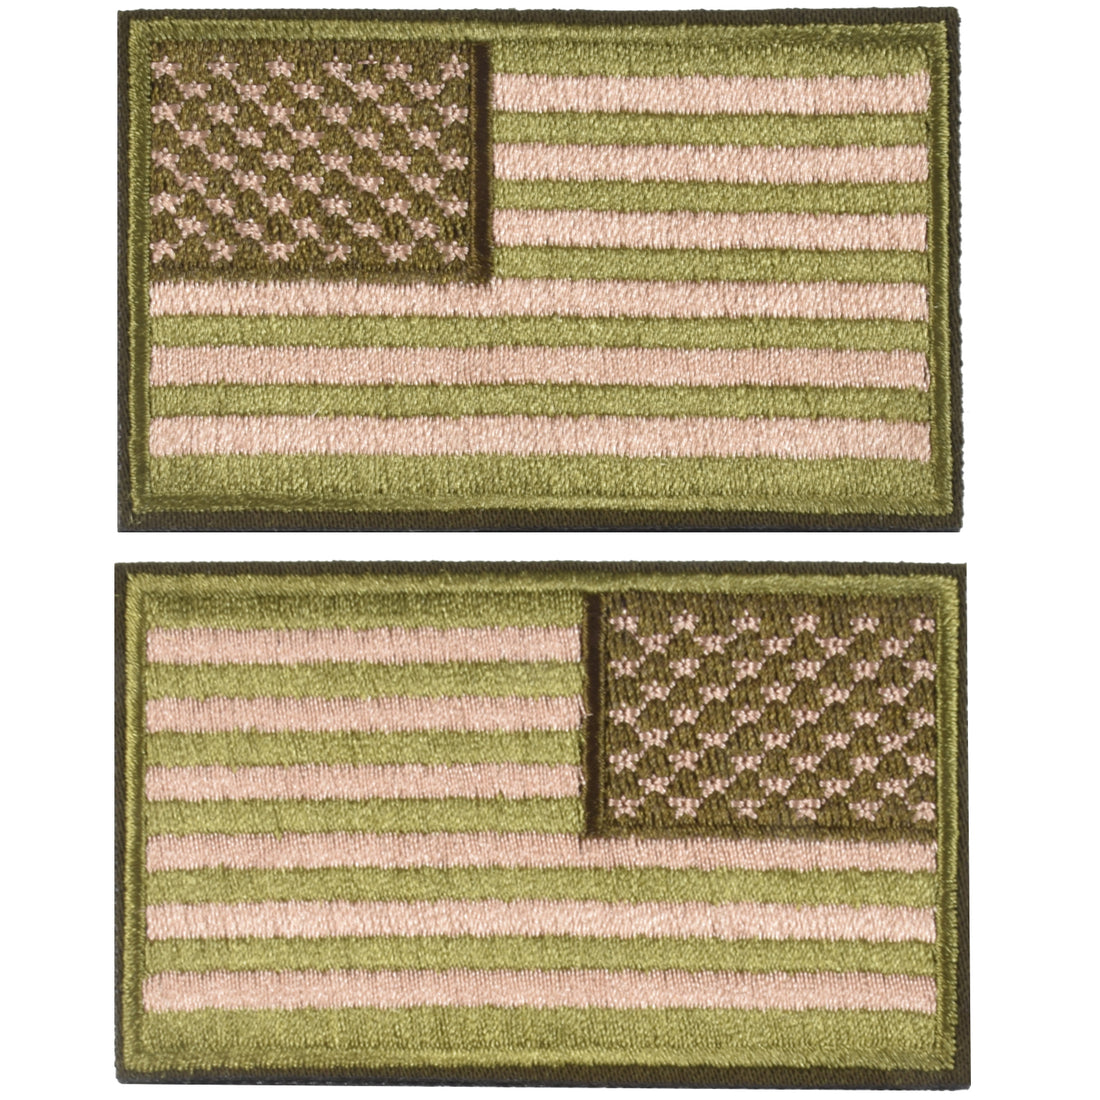 2 Pieces Tactical US American Flag Patch, Military USA United States of America Uniform Emblem Patches, Multitan-Reverse Green